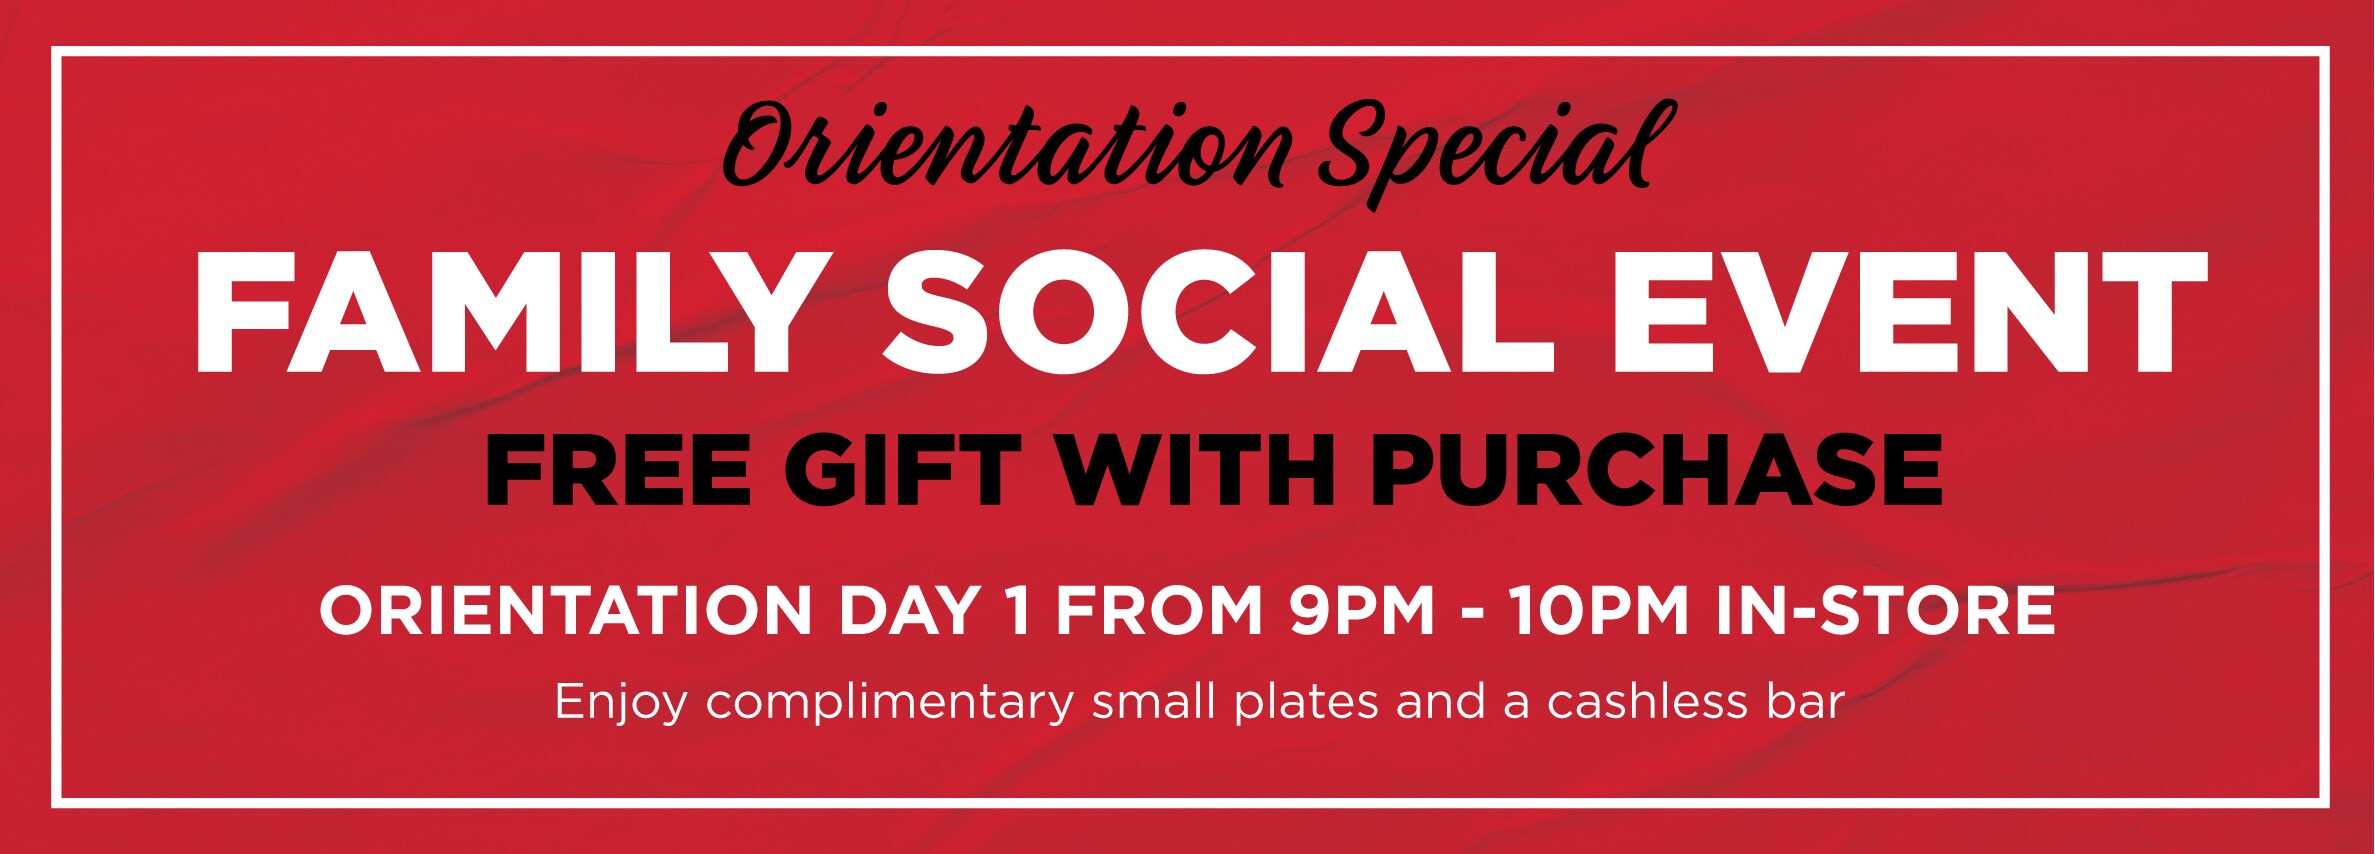 Orientation Special Family Social Event free gift with purchase. Orientation Day 1 from 9pm-10pm in store enjoy complimentary small plates and a cashless bar